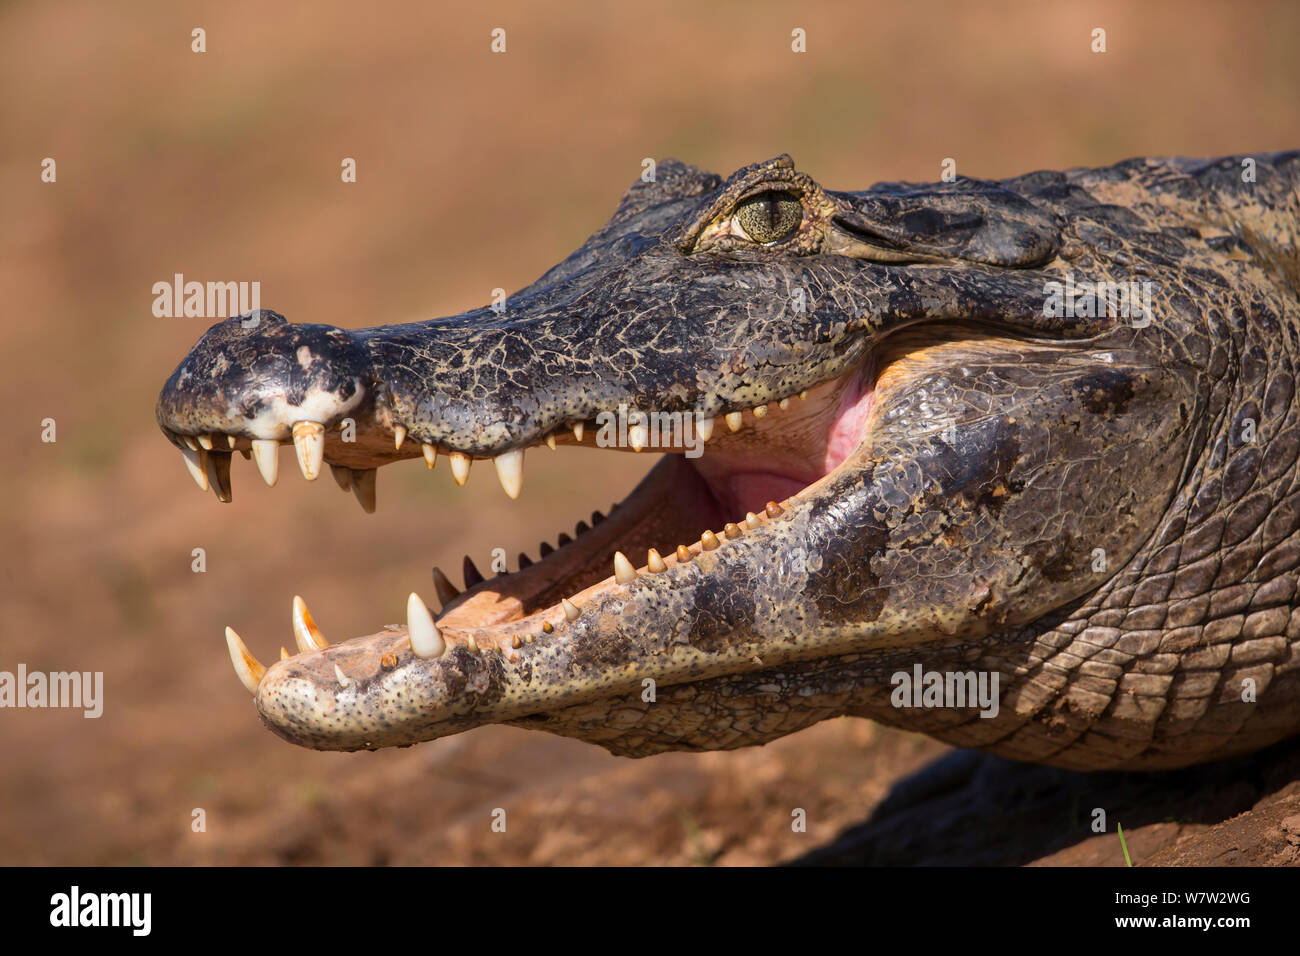 Spectacled Caiman (Caiman crocodilus) thermoregulating with mouth open, Pantanal, Brazil. Stock Photo